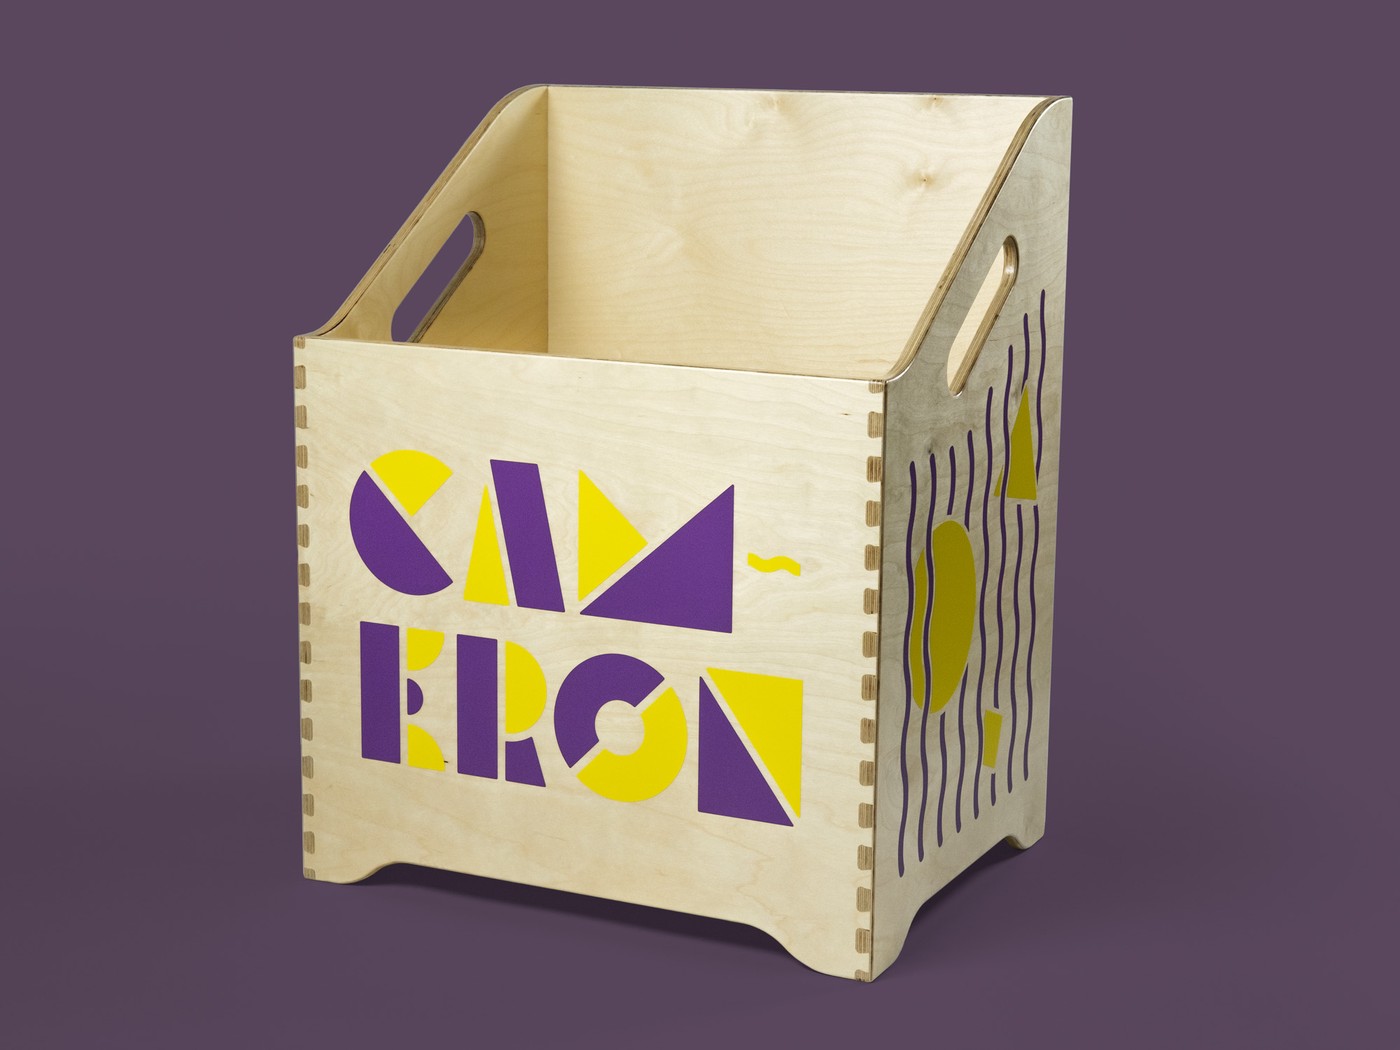 Plywood box on a purple background. Purple and yellow geometric shapes and wavy lines applied to the sides.